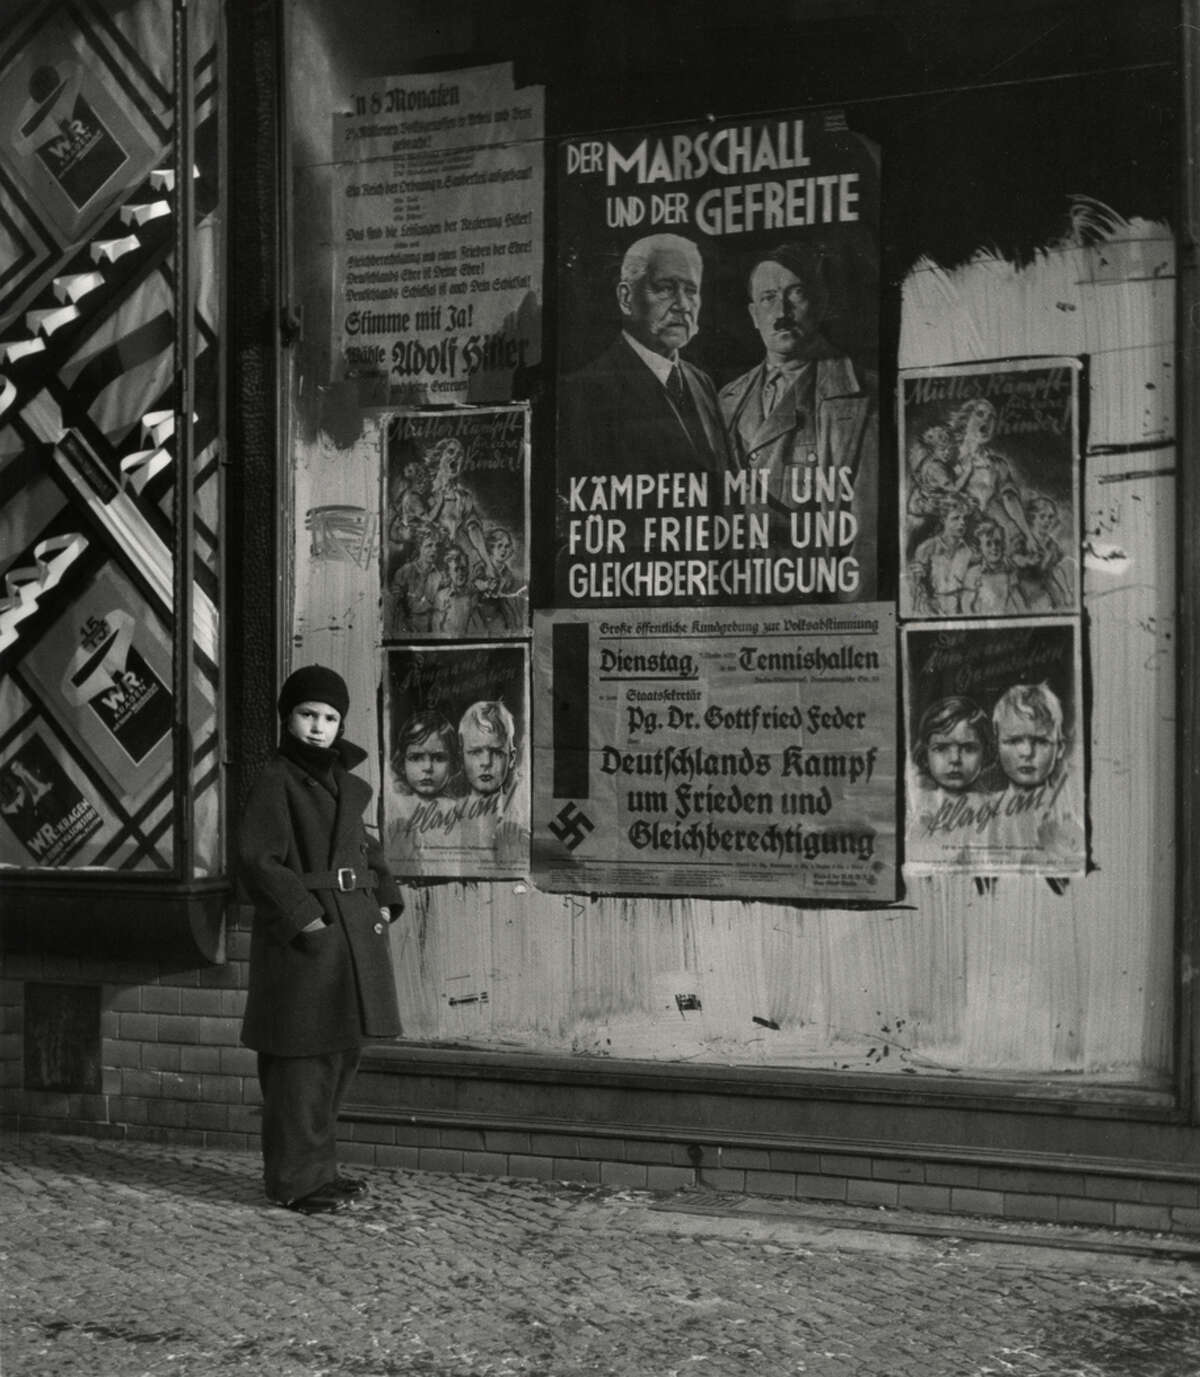 Vishniac photographed his daughter, Mara, in front of an election poster for Hindenburg and Hitler, Berlin, 1933.